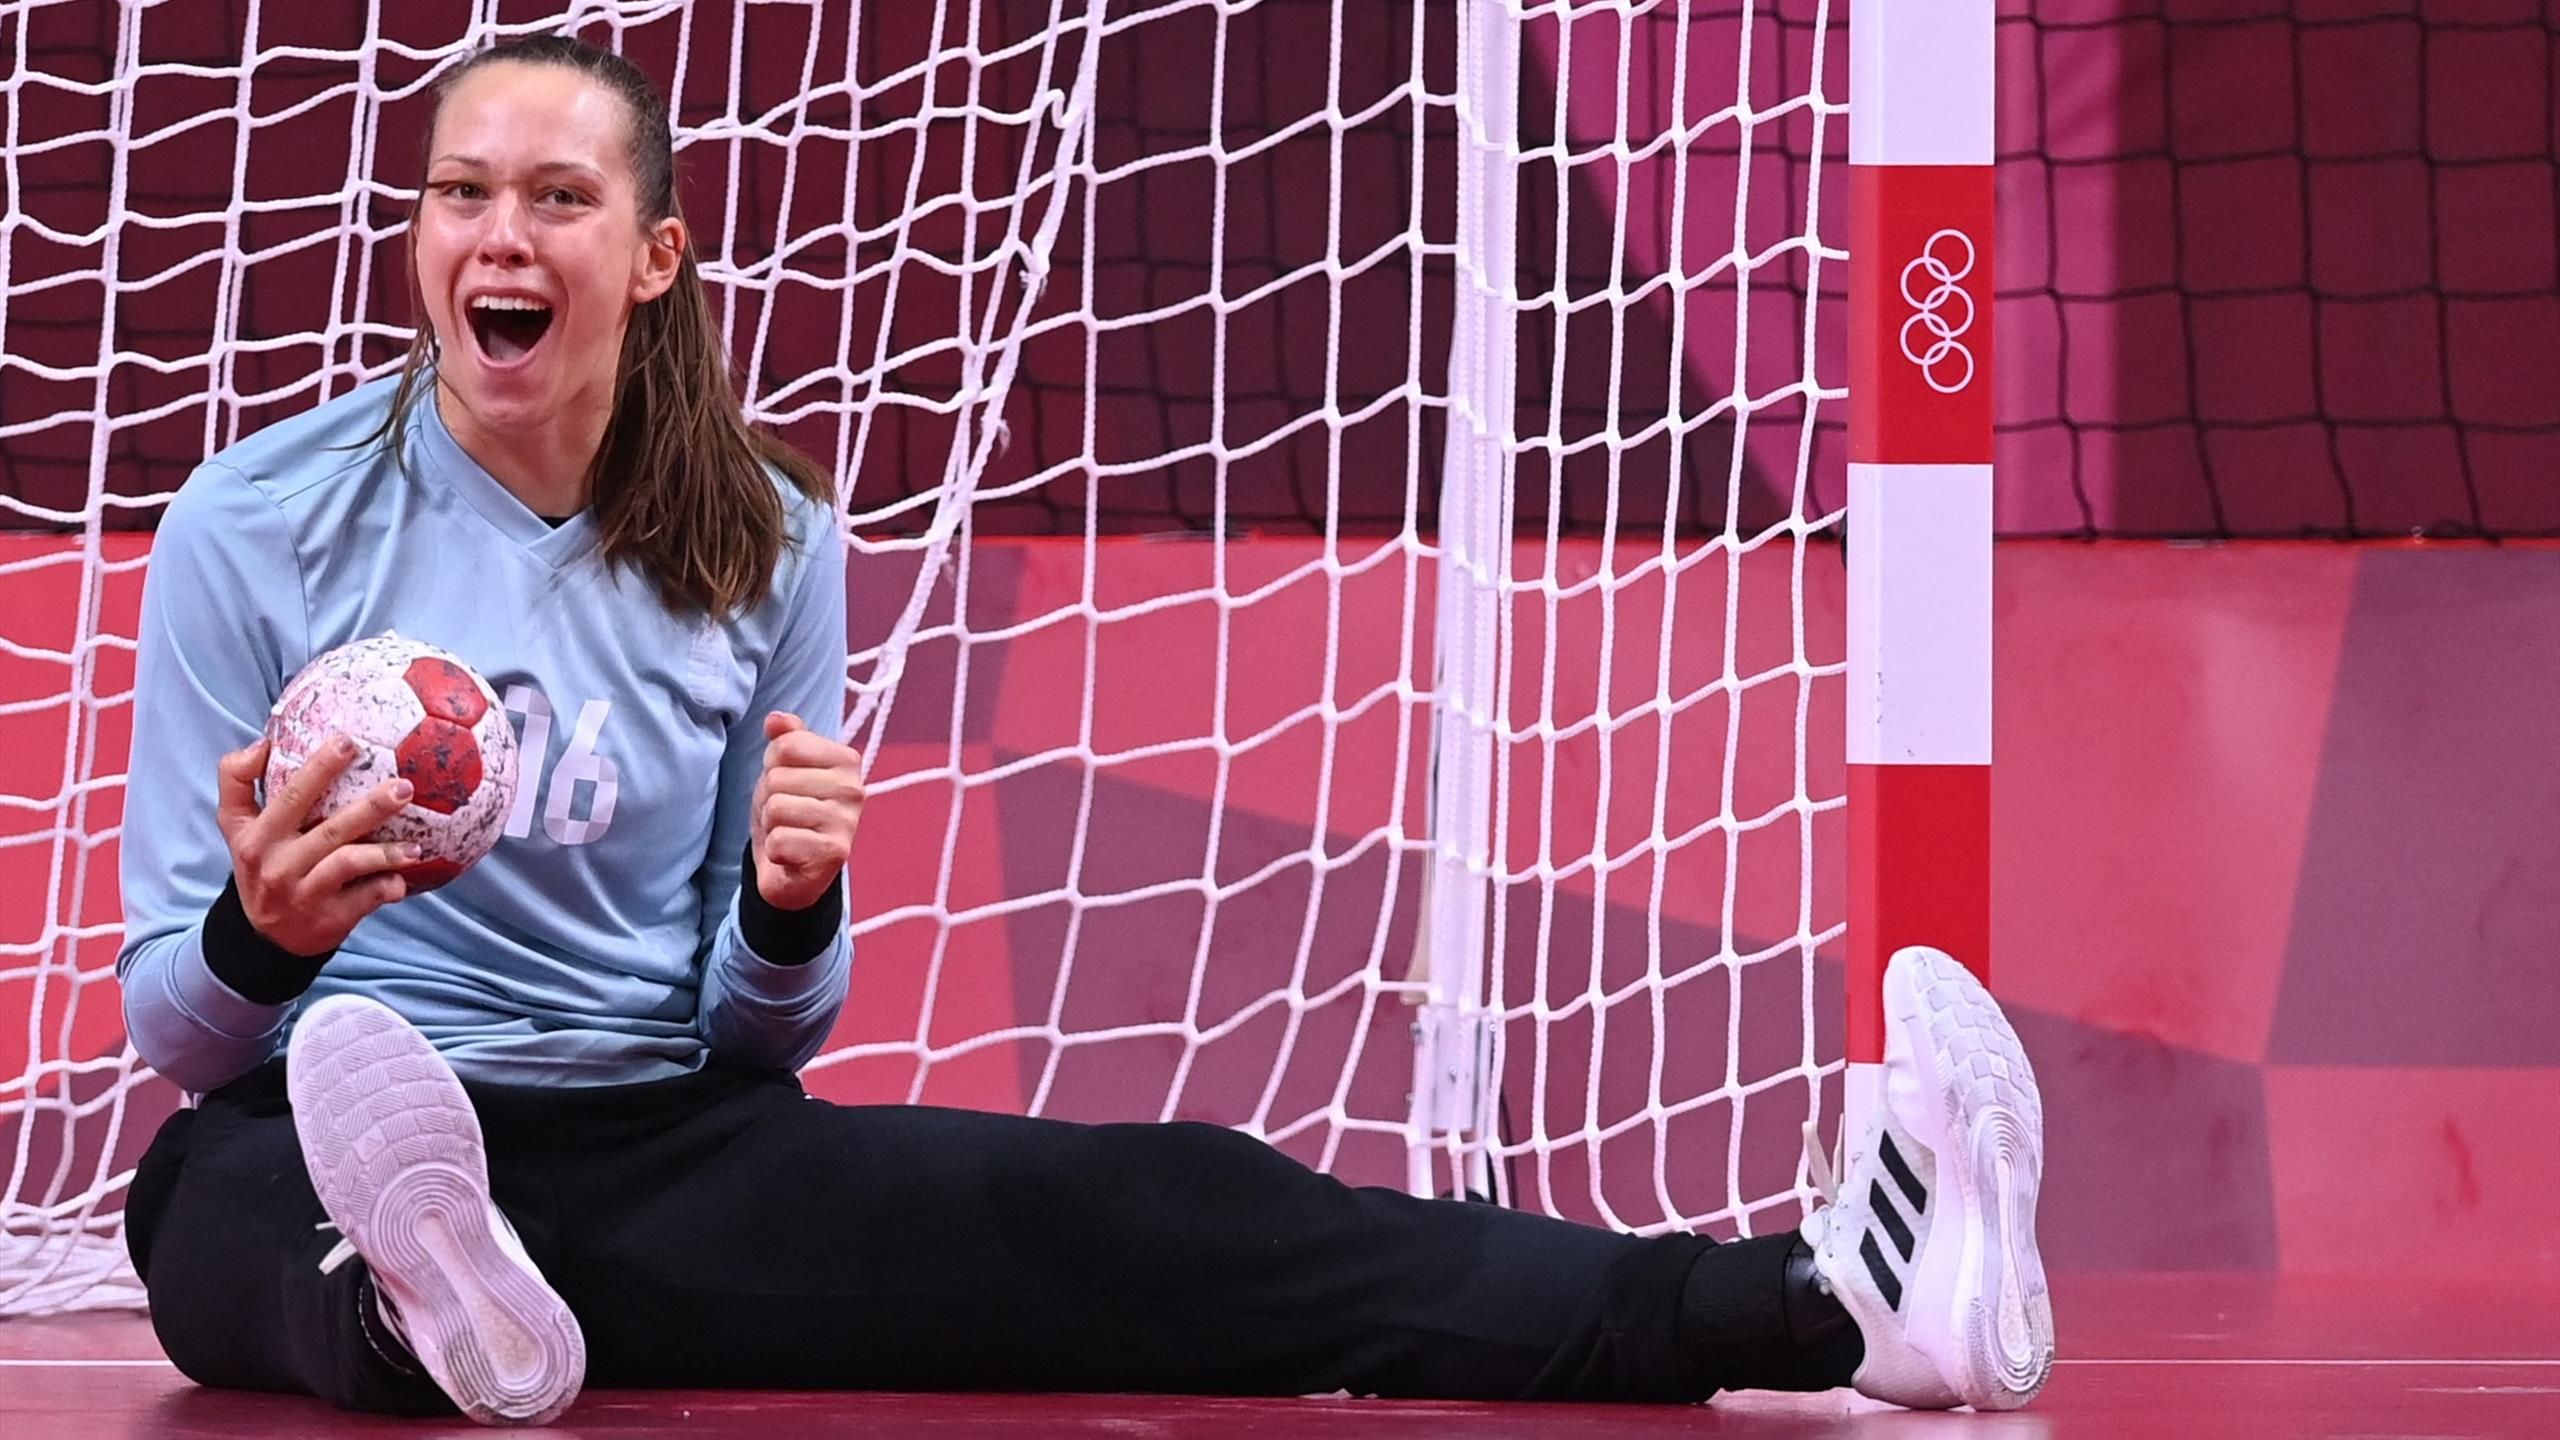 Psychological aspects also play a role in choosing the goalkeeper for the women’s handball team